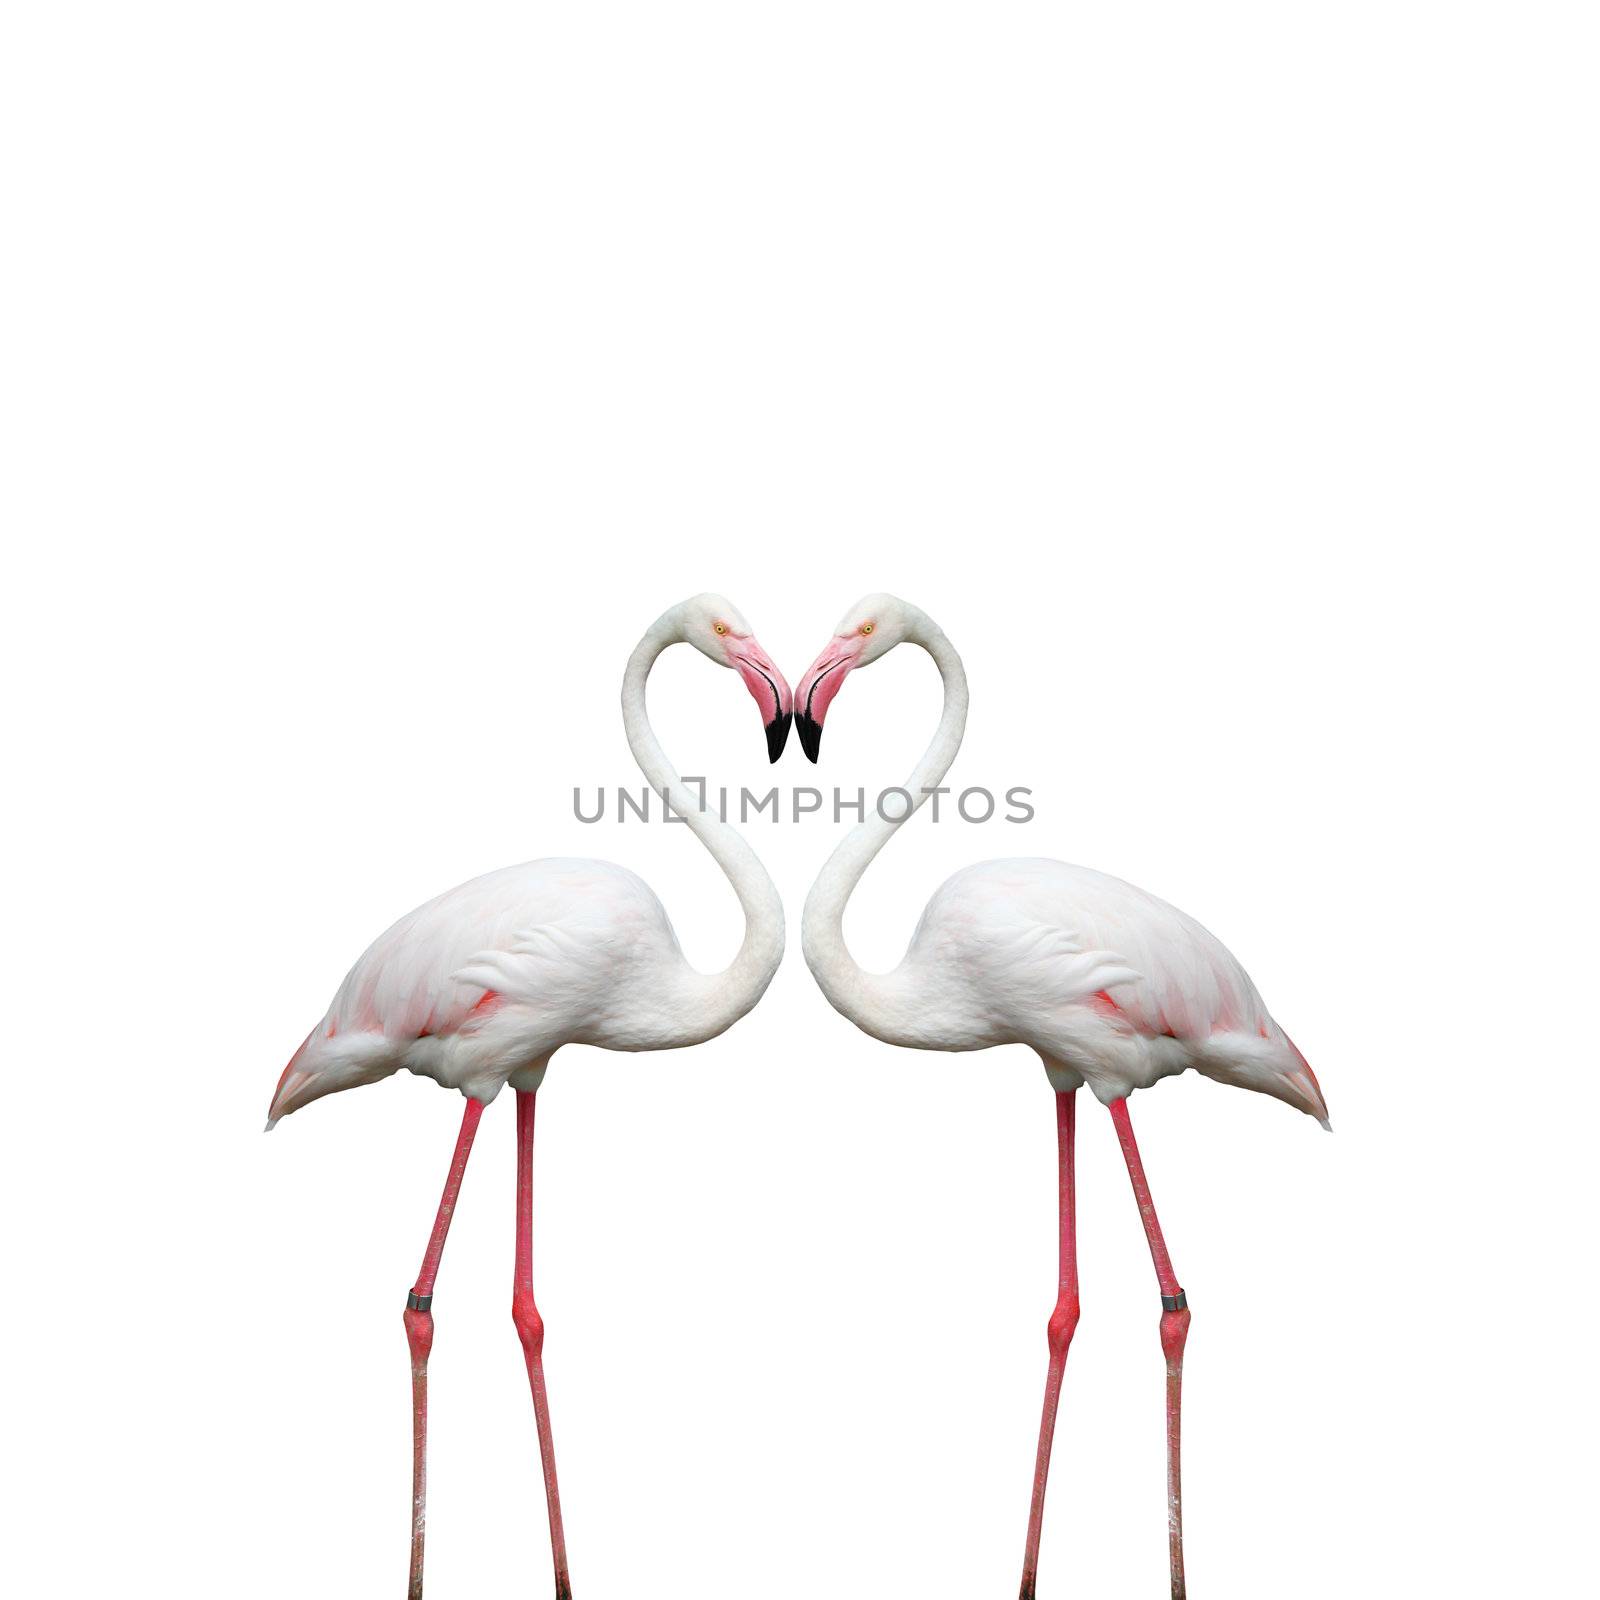 Two colorful flamingos looking at each other and building a hear